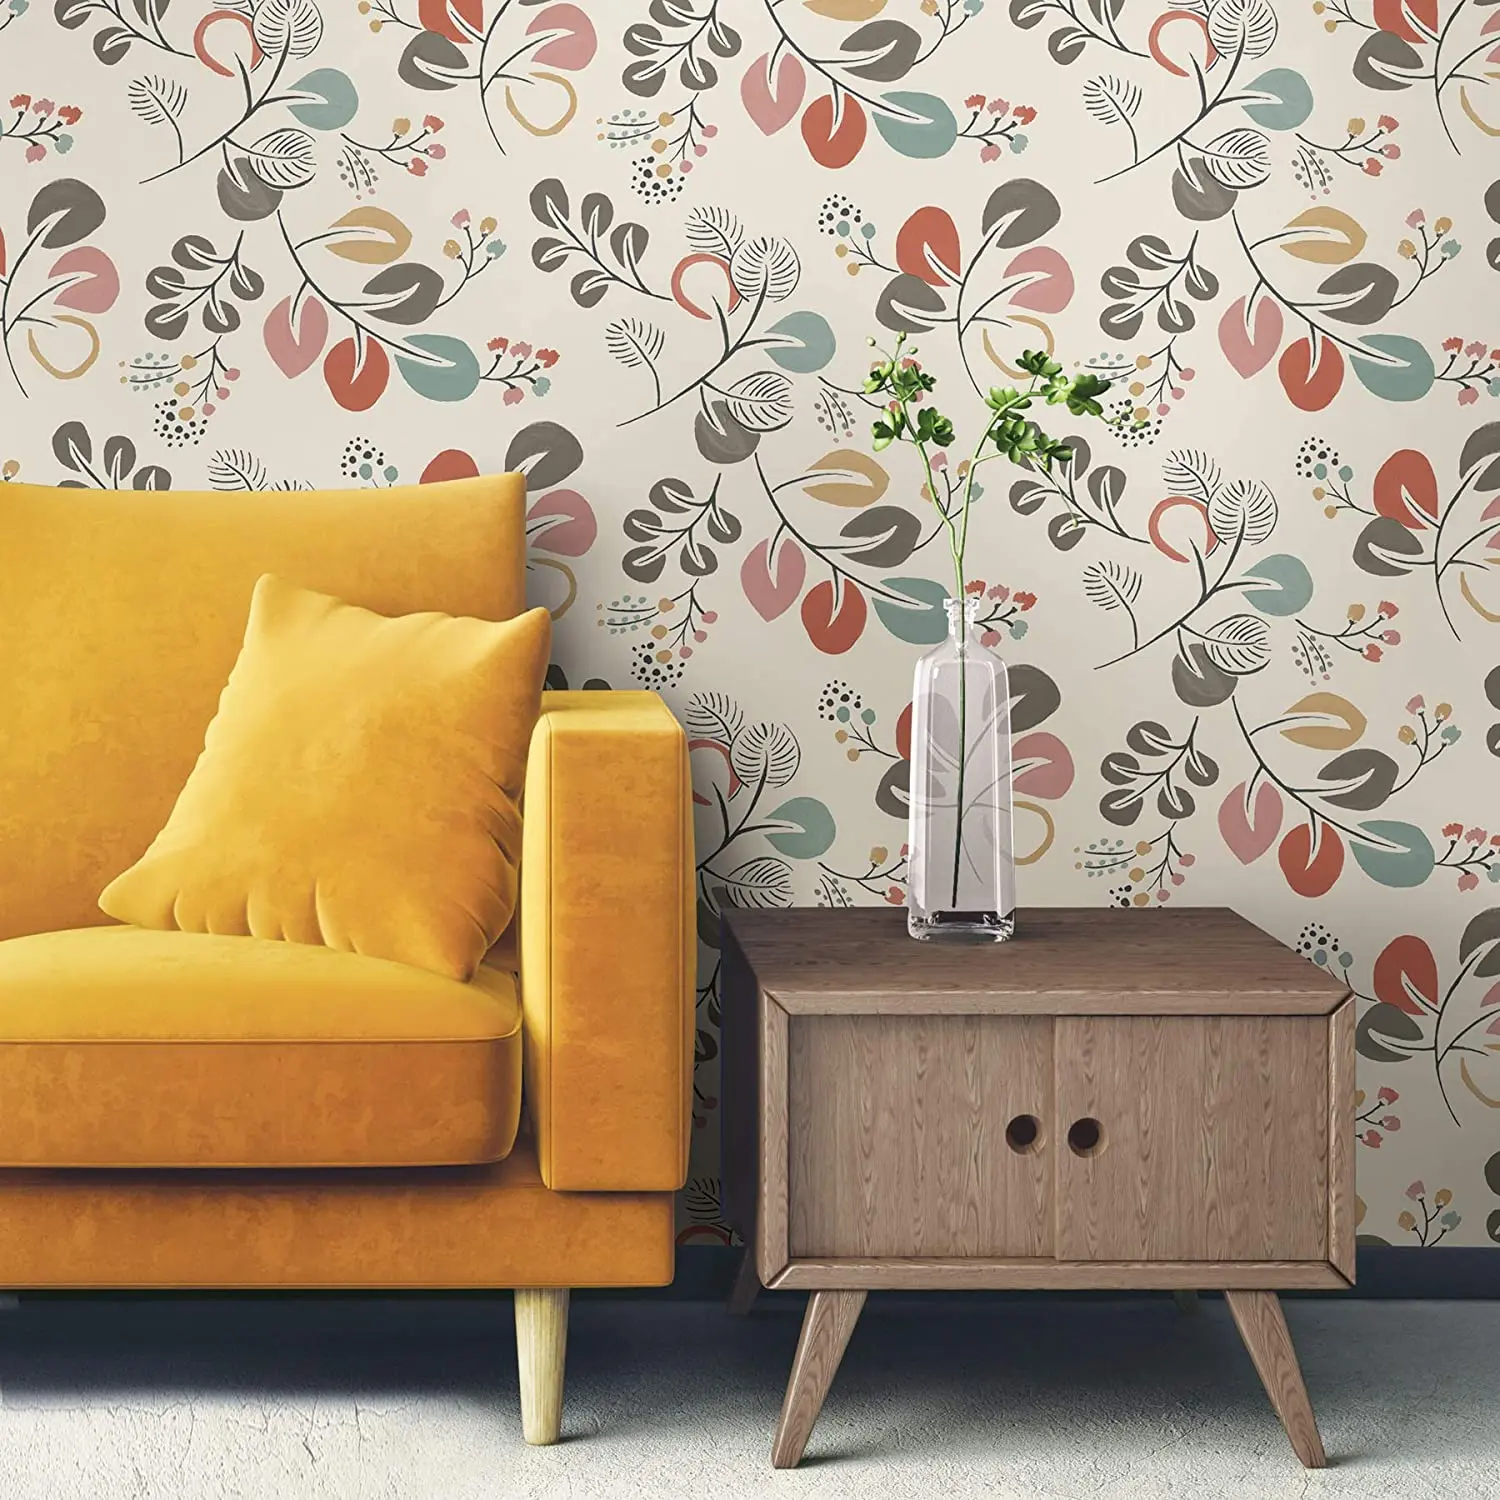 

Floral Self Adhesive Wallpaper Yellow Peel and Stick Contact Paper Removable Wallcoverings Vinly Film for Home Decor